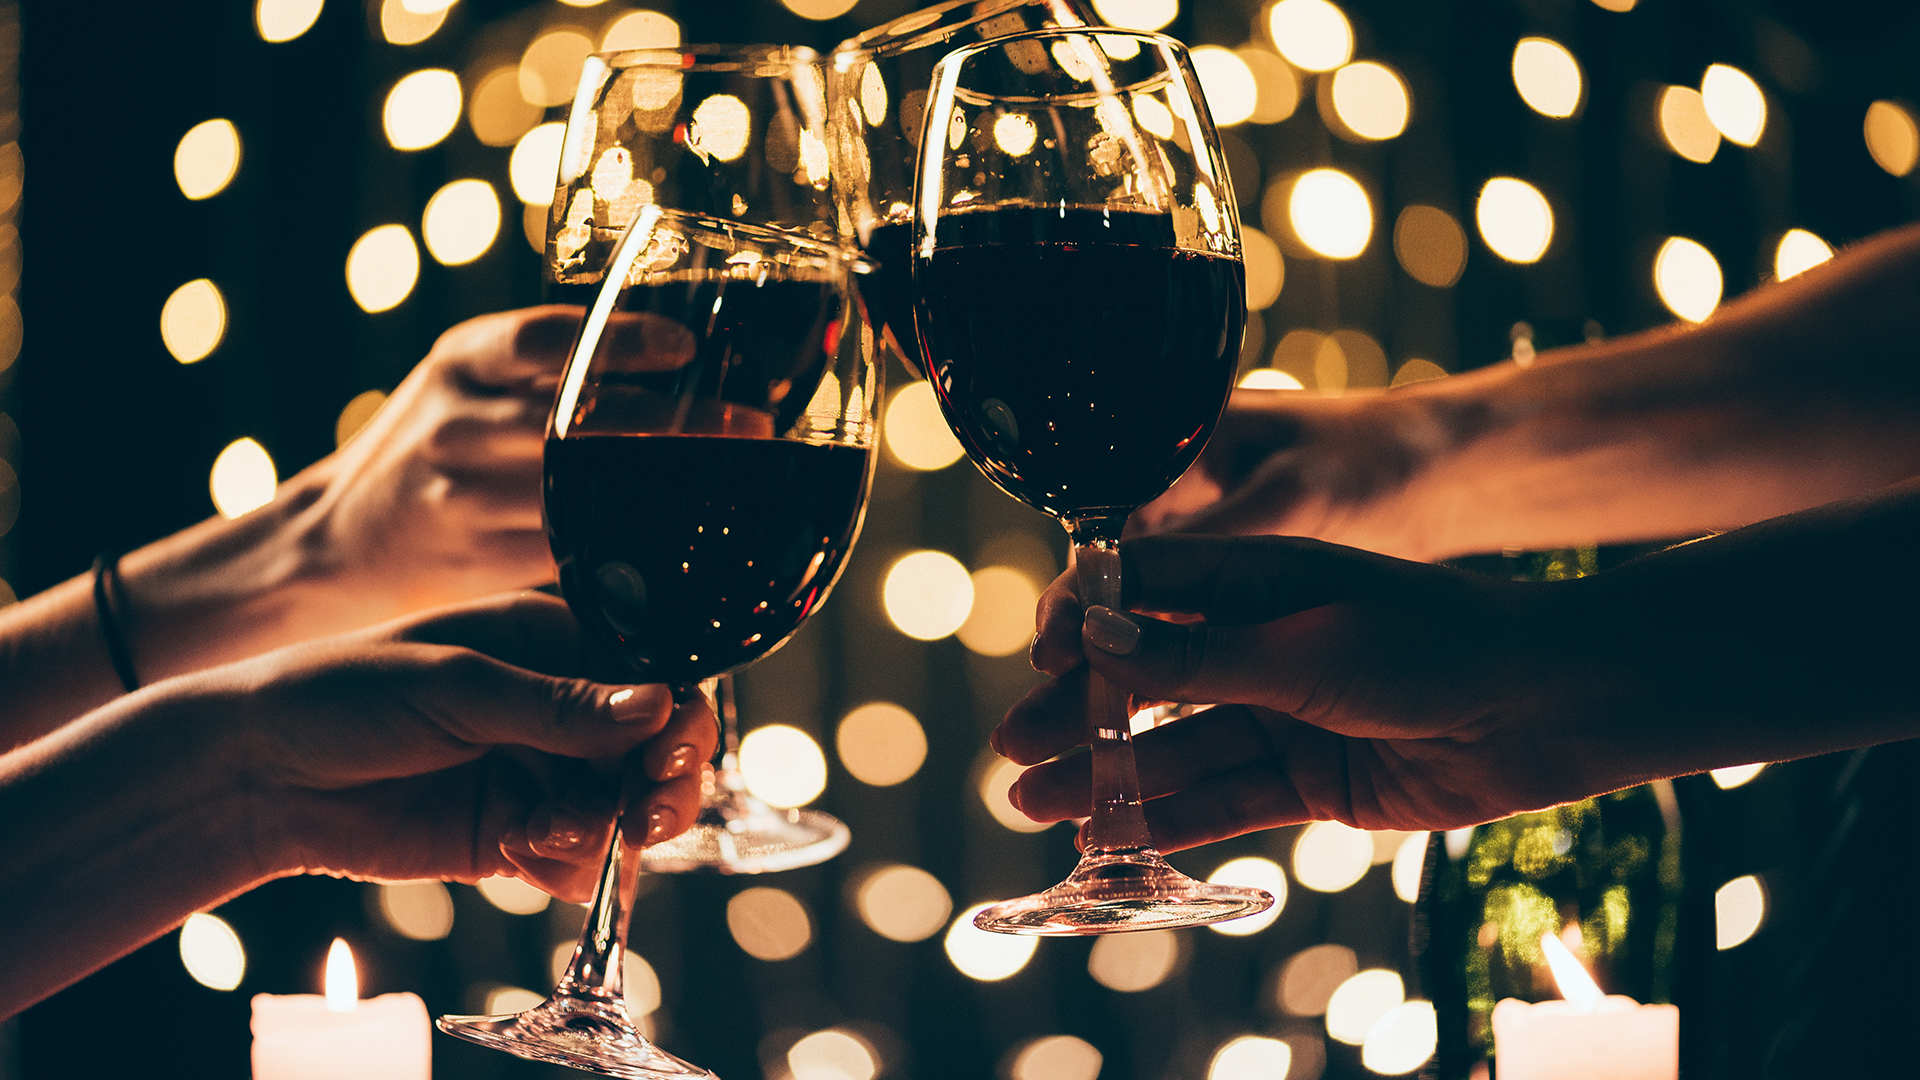 Four hands toasting with glasses of red wine with string lights in the background.